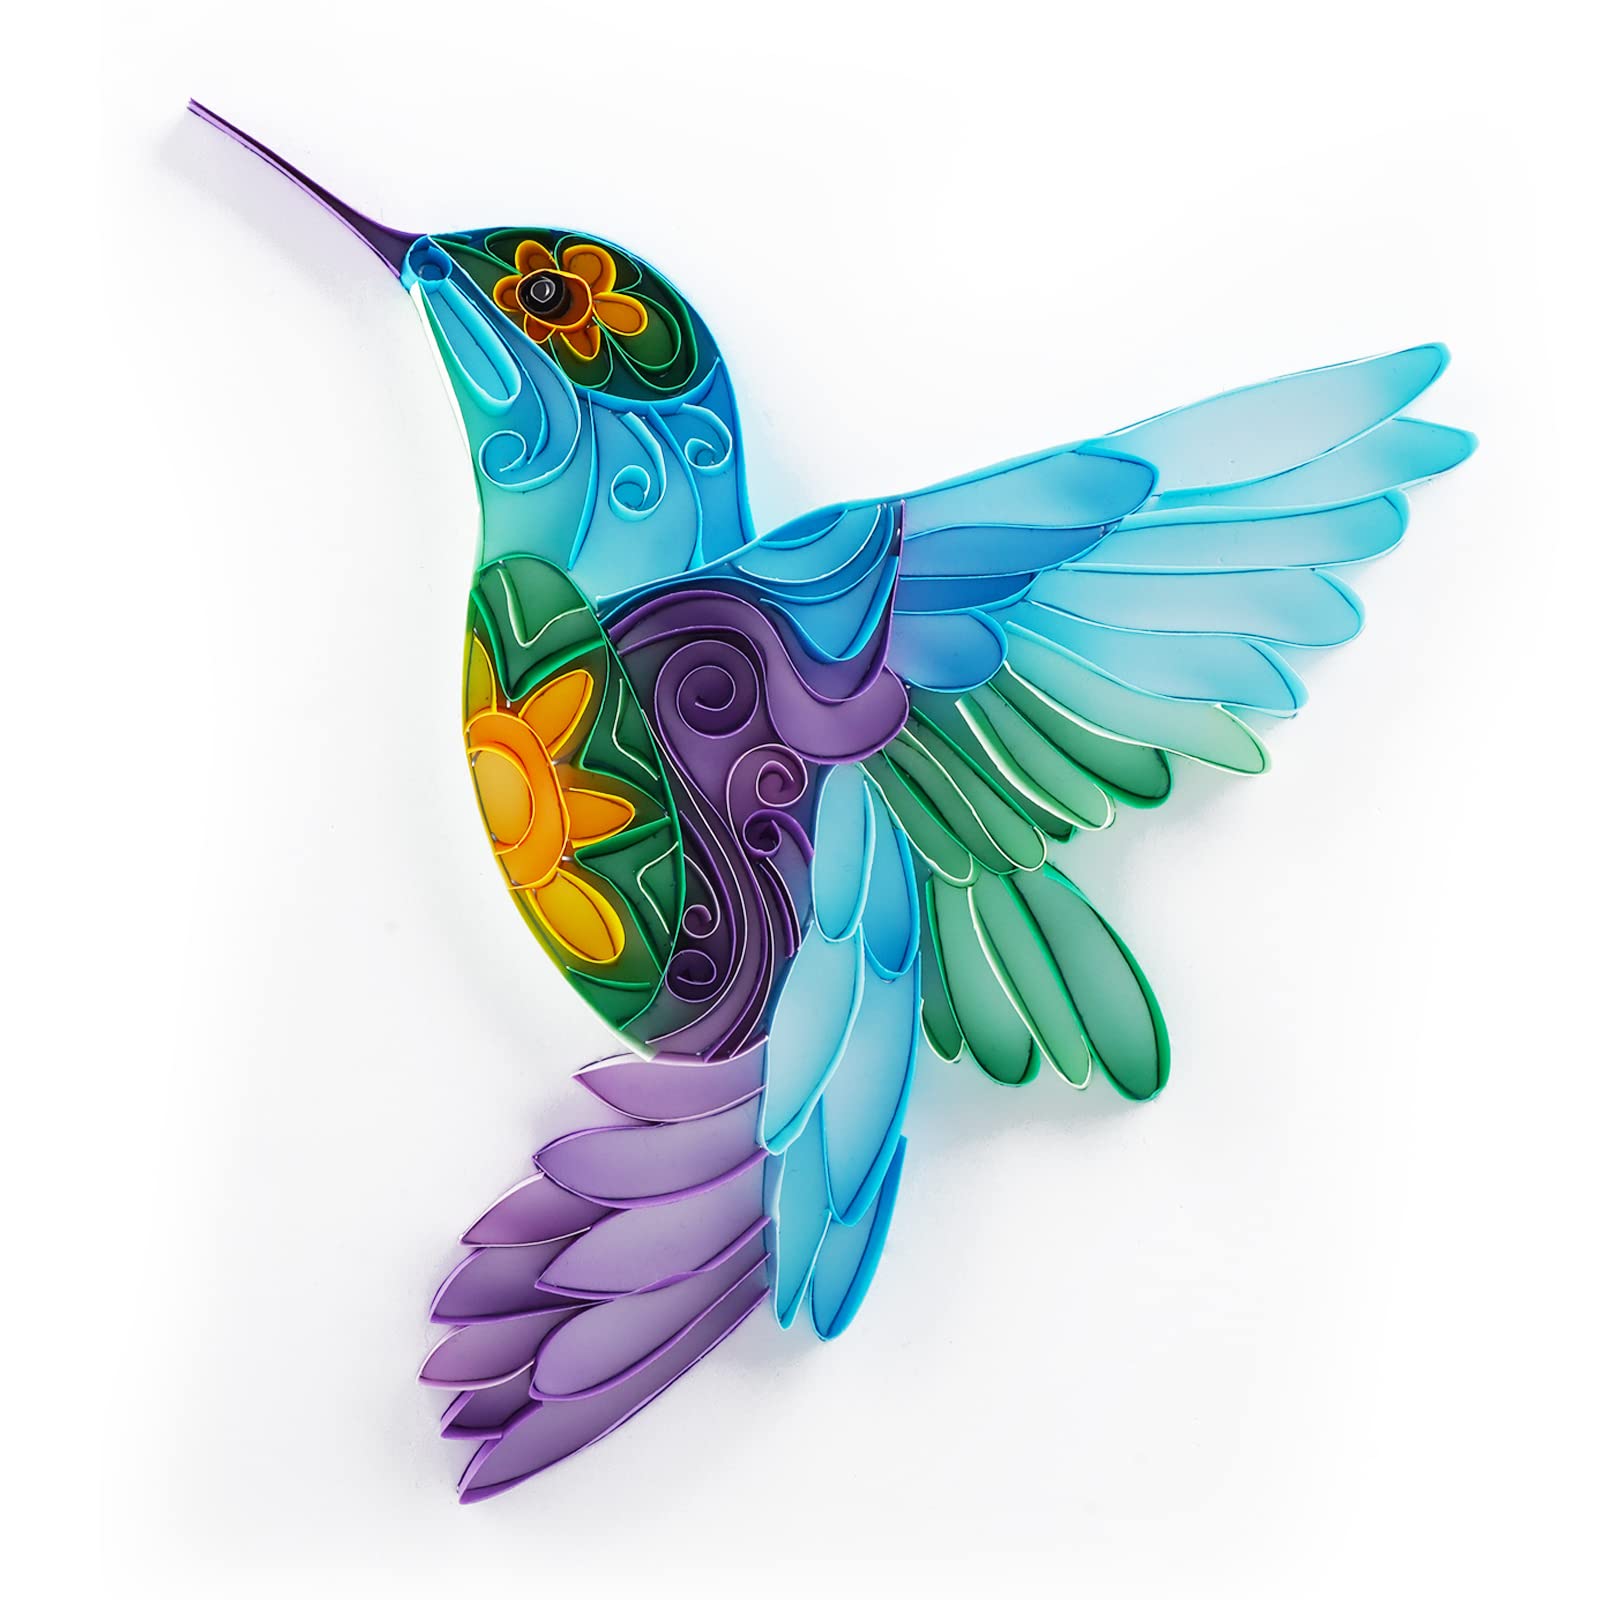 Uniquilling Quilling Kits Paper Quilling Kit for Adults Beginner, 16 * 20in  Mandala Hummingbird with Paper Quilling Tools& Using Manual, DIY Kits for